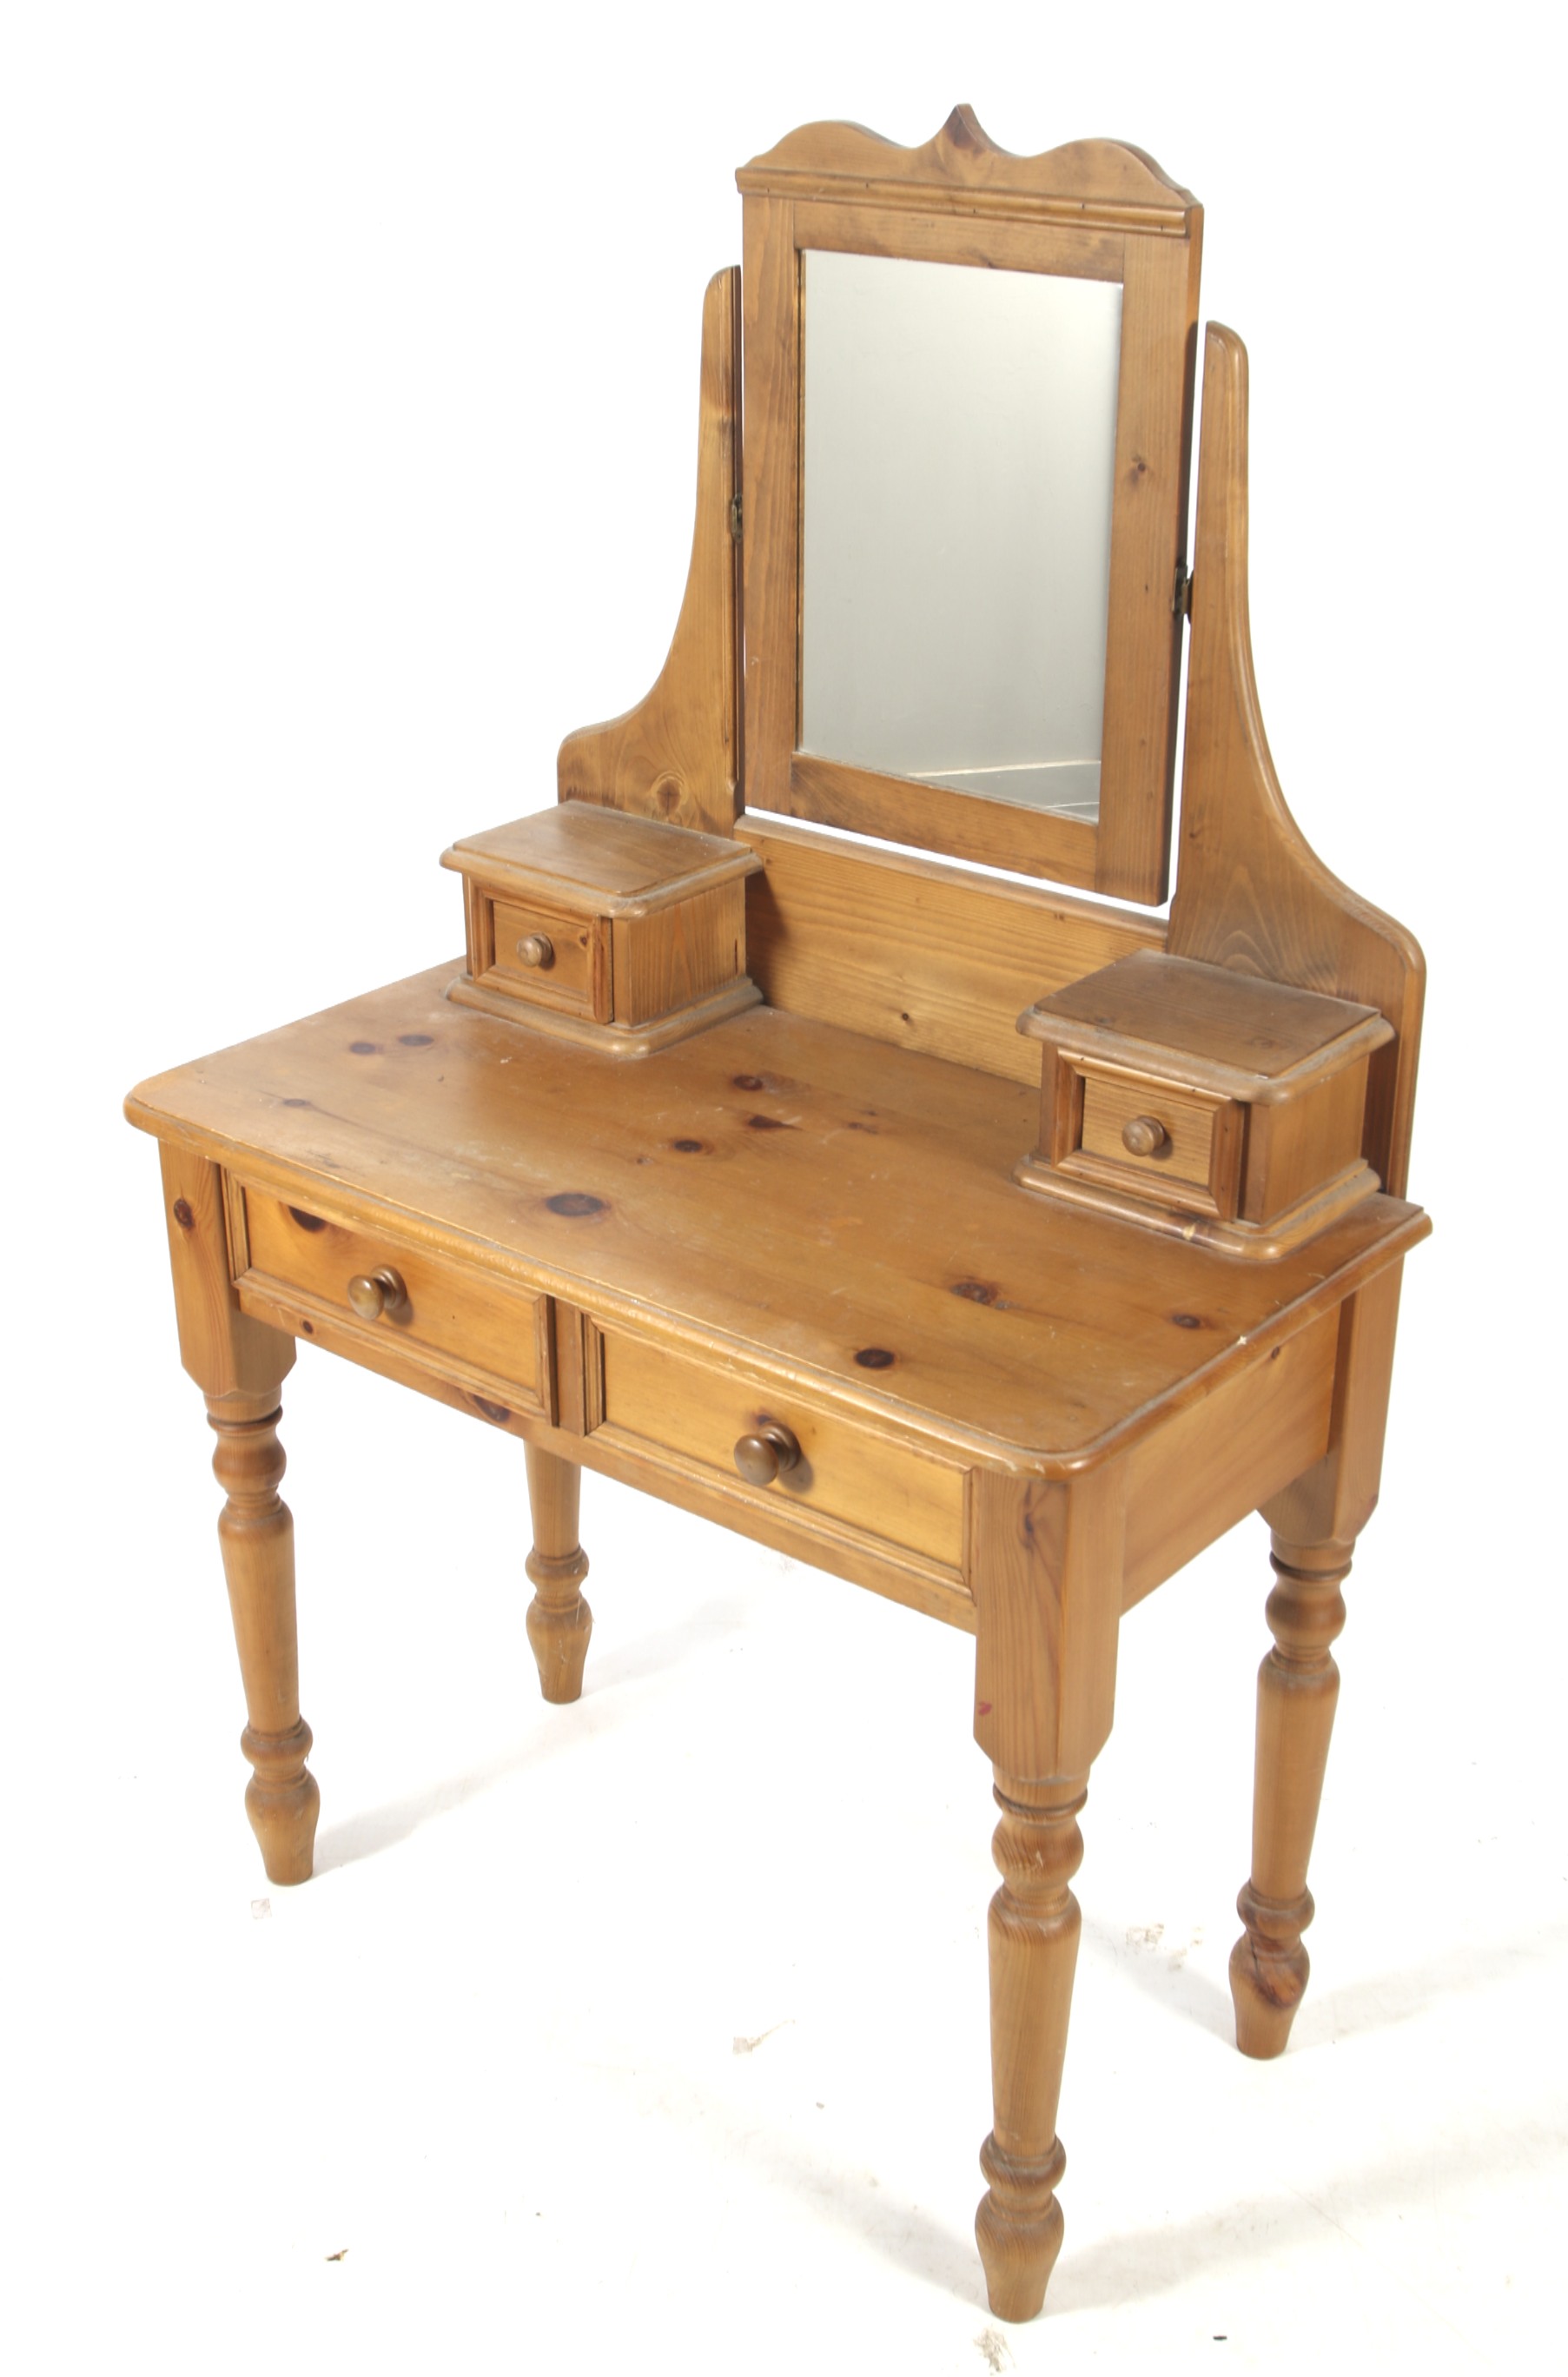 A vintage pine dressing table.